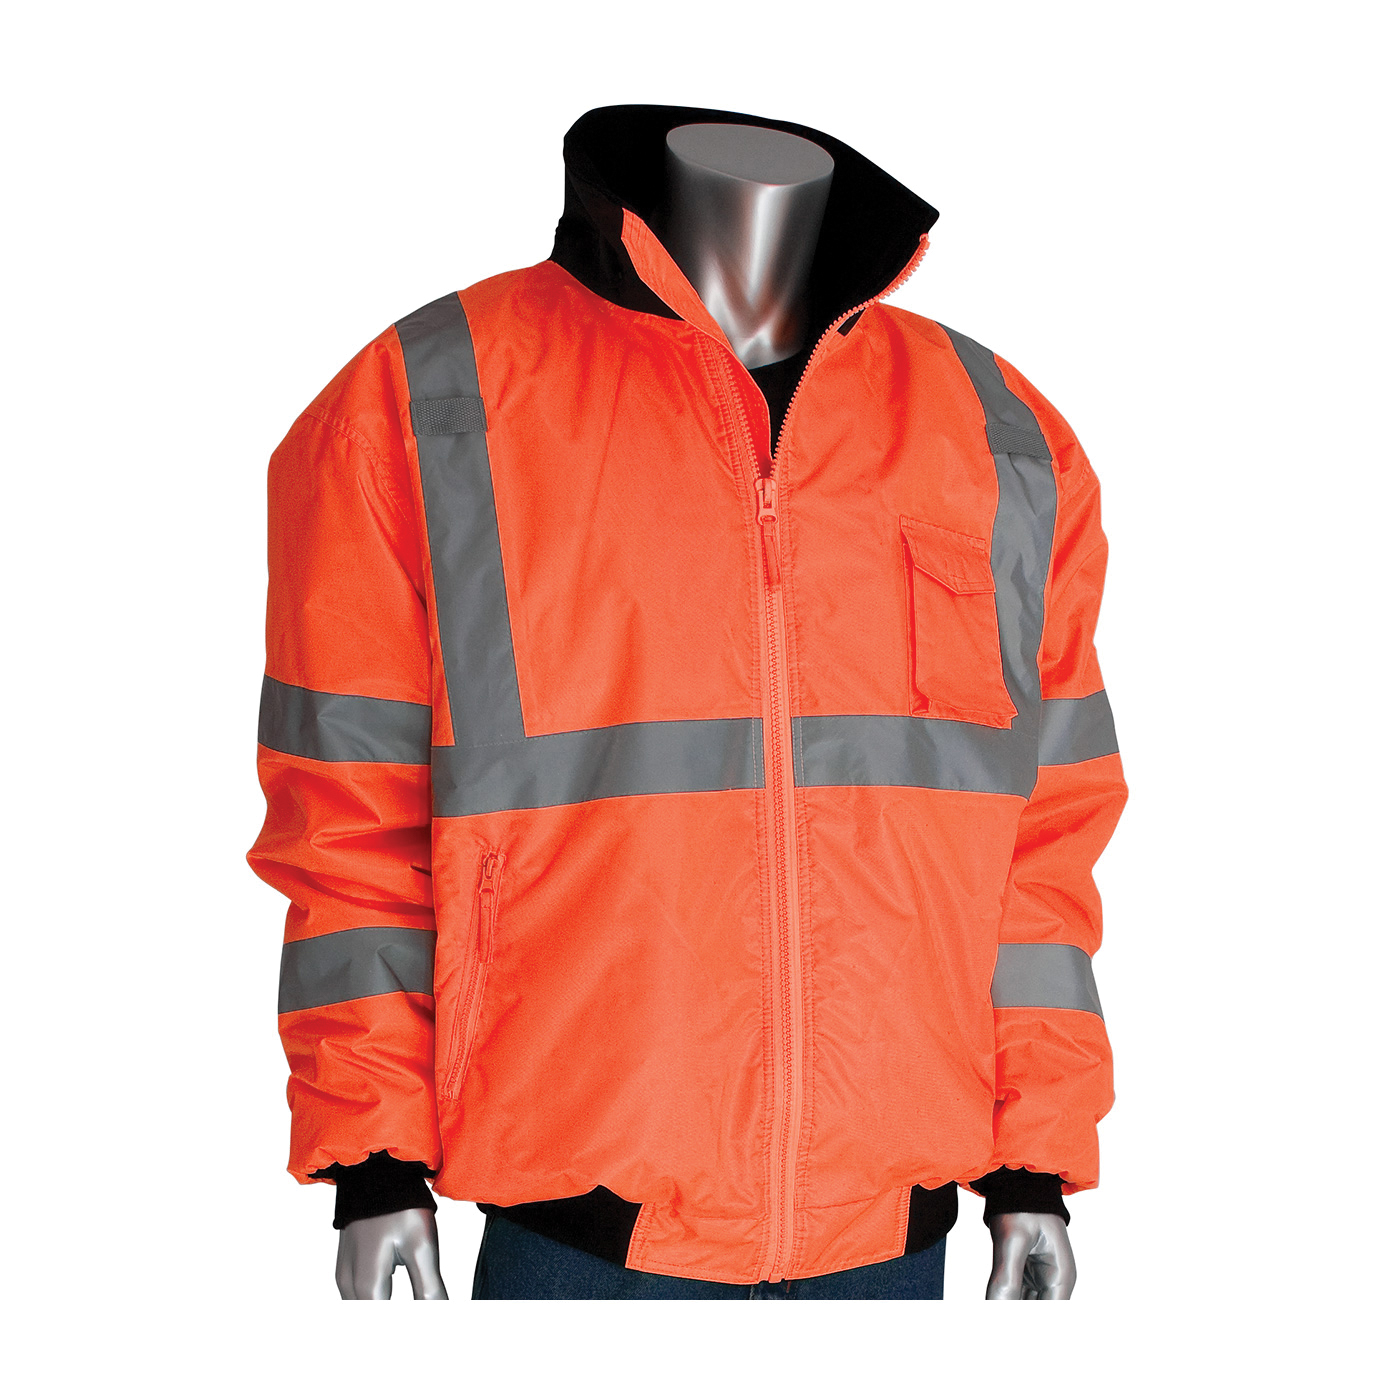 PIP® 333-1762-OR/3X Bomber Jacket With Zip-Out Fleece Liner, Hi-Viz Lime Orange, Polyester, 66 in Chest, Resists: Water, Specifications Met: ANSI 107 Class 3 Type R